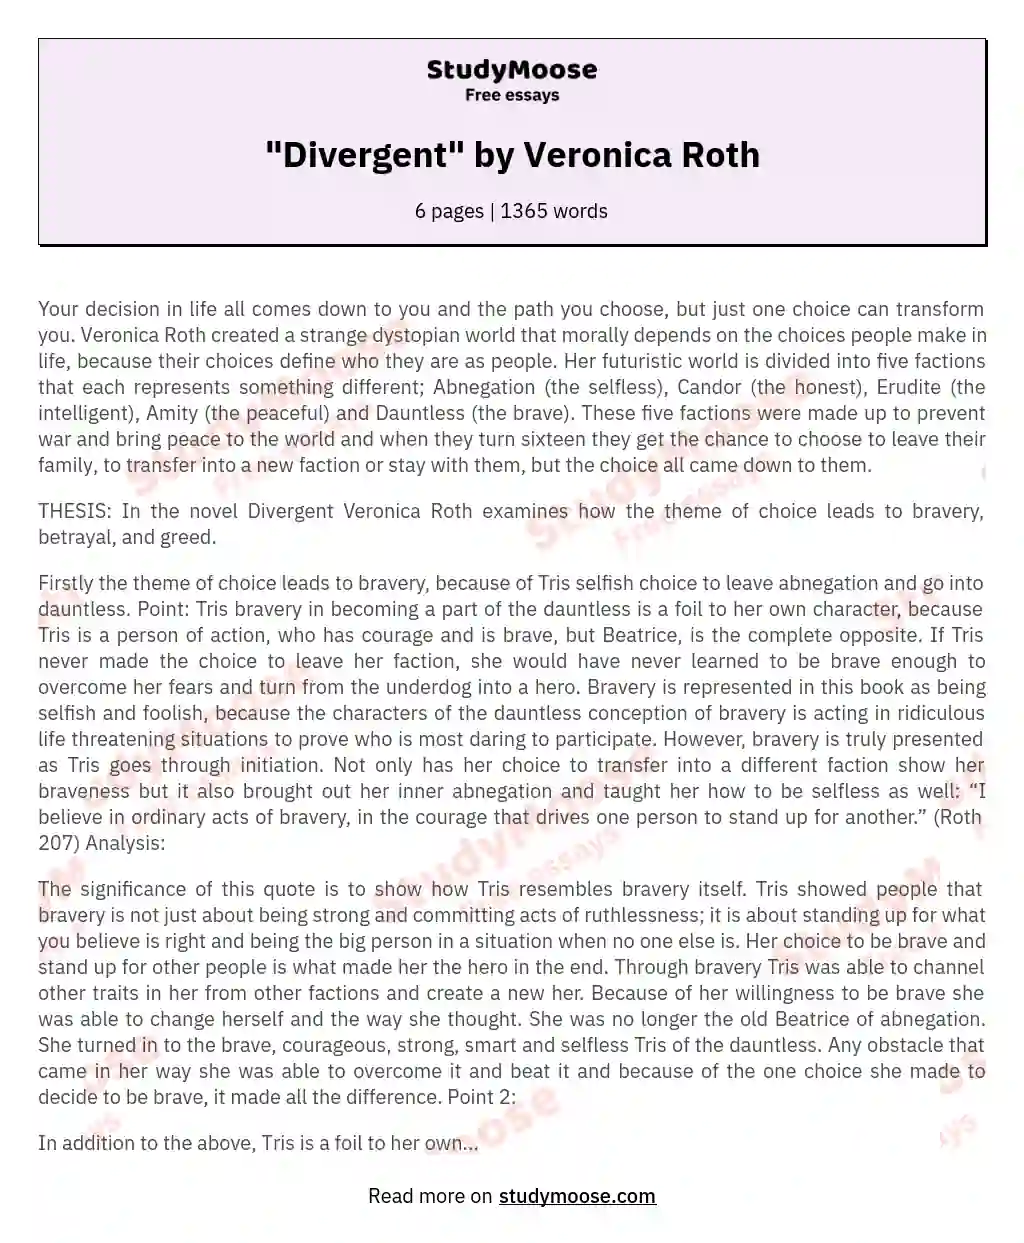 "Divergent" by Veronica Roth essay